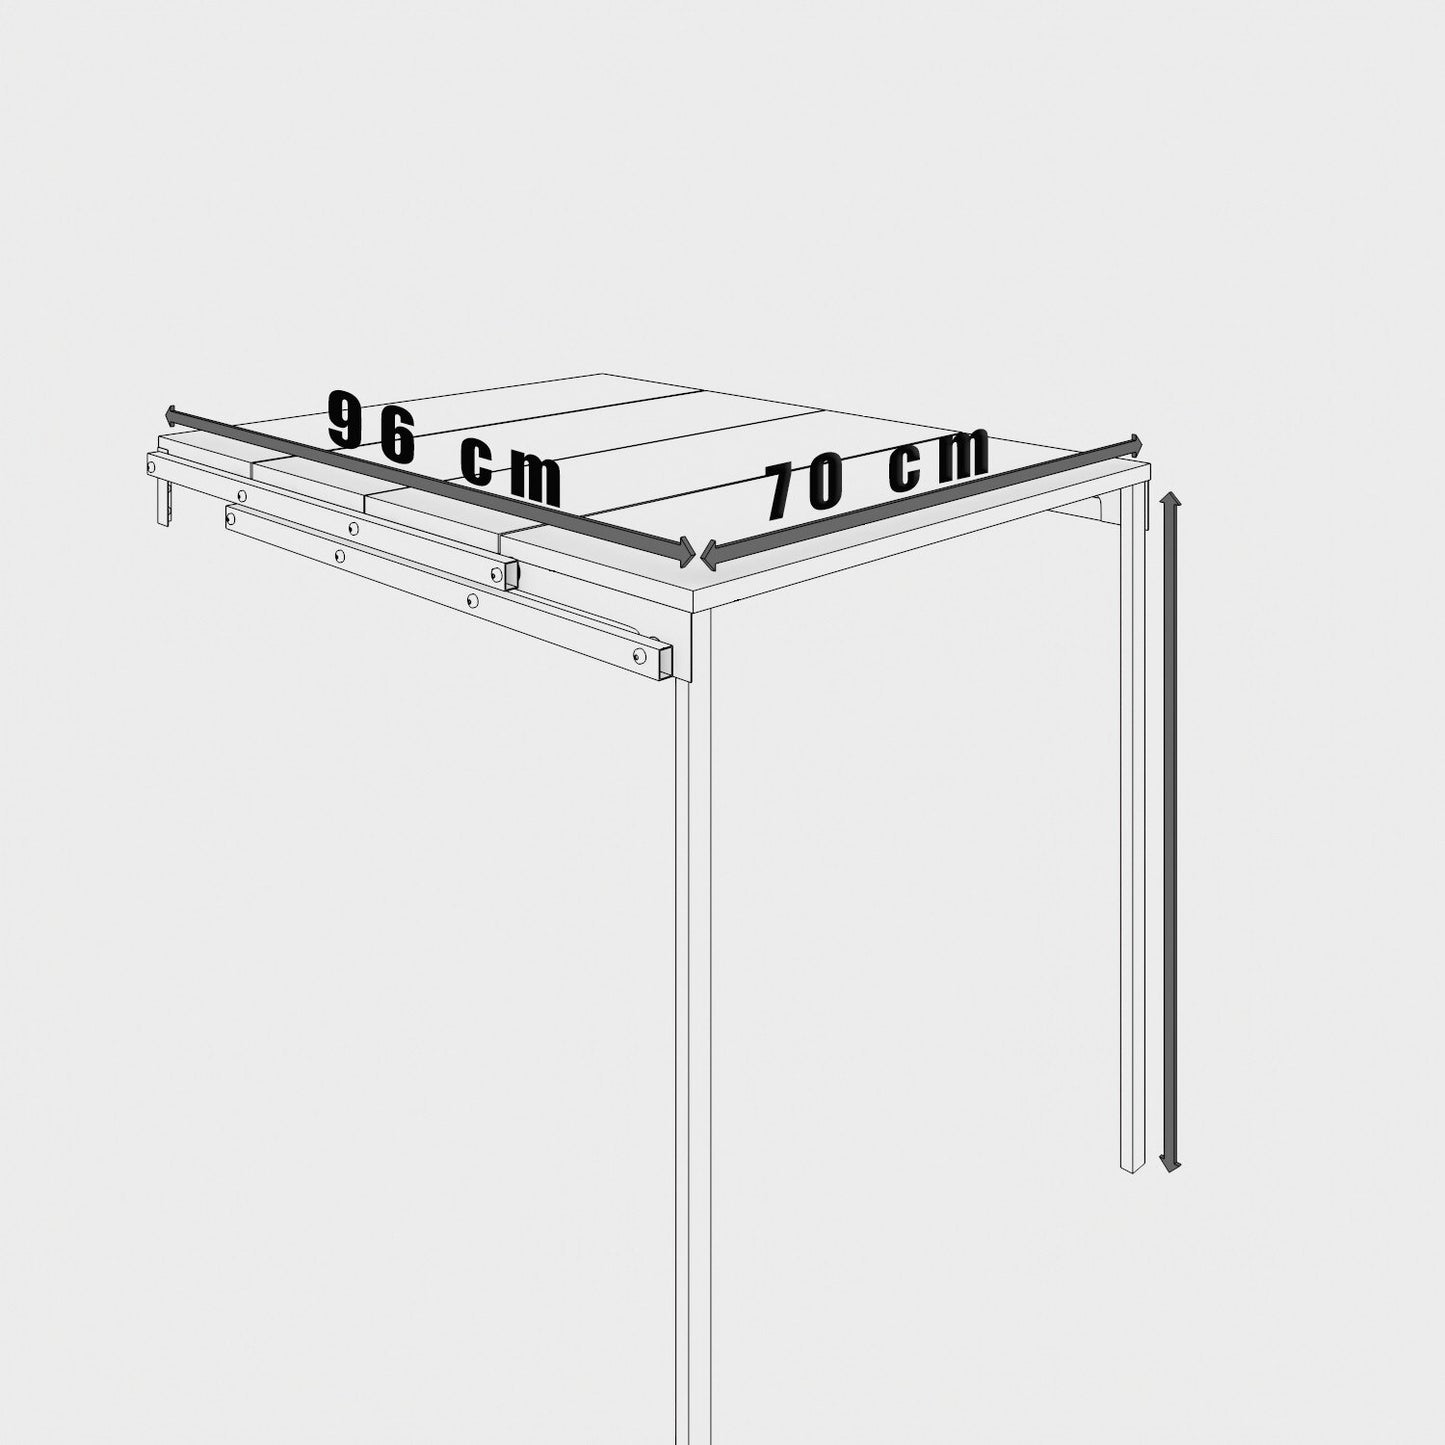 Wall mounted folding Retractable Shelf Dining Table Extendable Balcony furniture for home kitchen Tables DIY Hardware coffee set